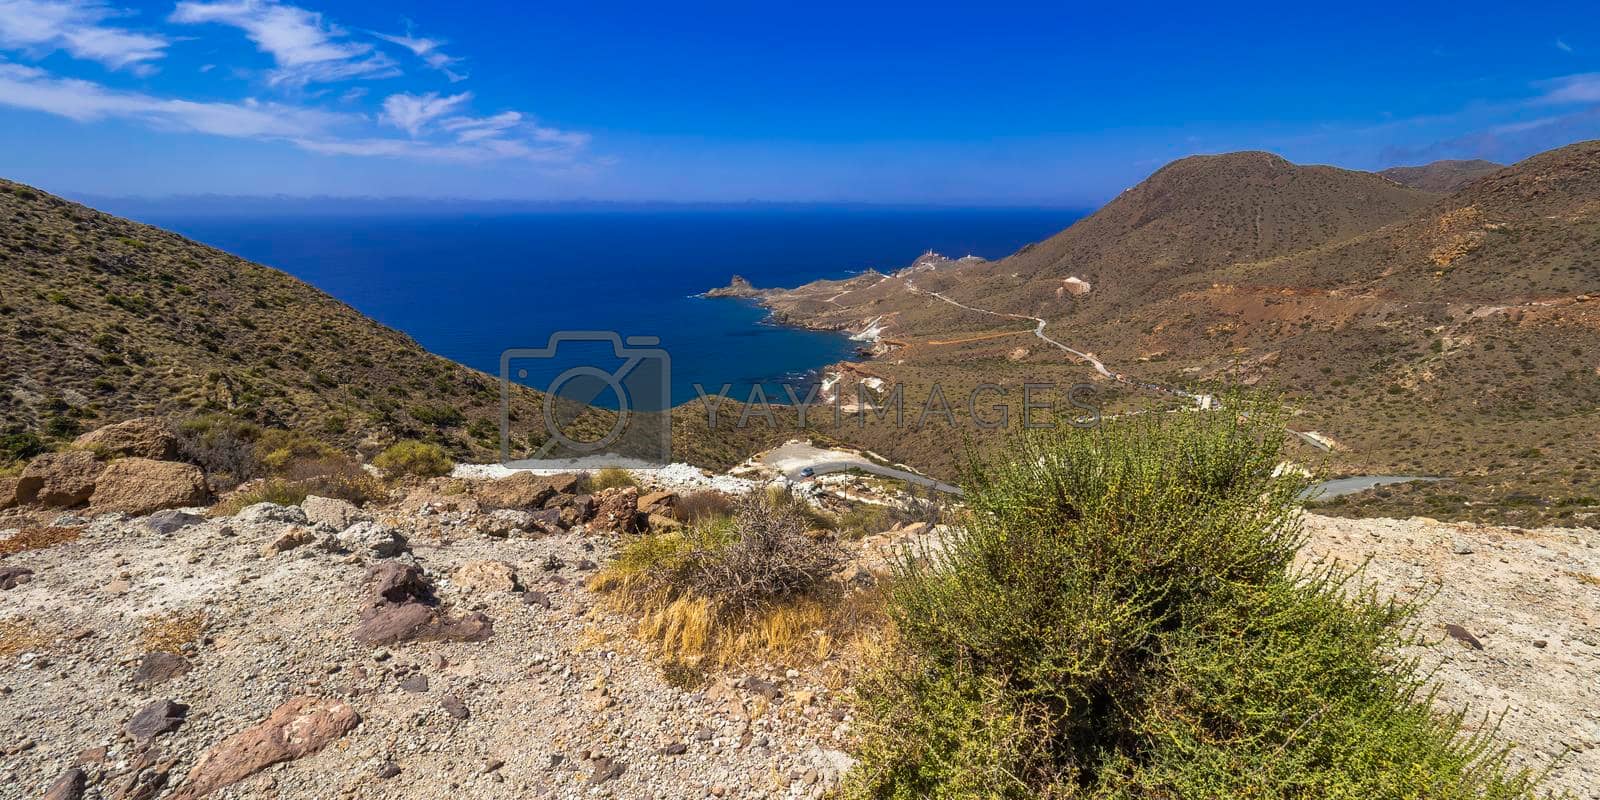 Royalty free image of Panoramic View from Vela Blanca Volcanic Dome, Cabo de Gata-Níjar Natural Park, Spain  by alcaproac